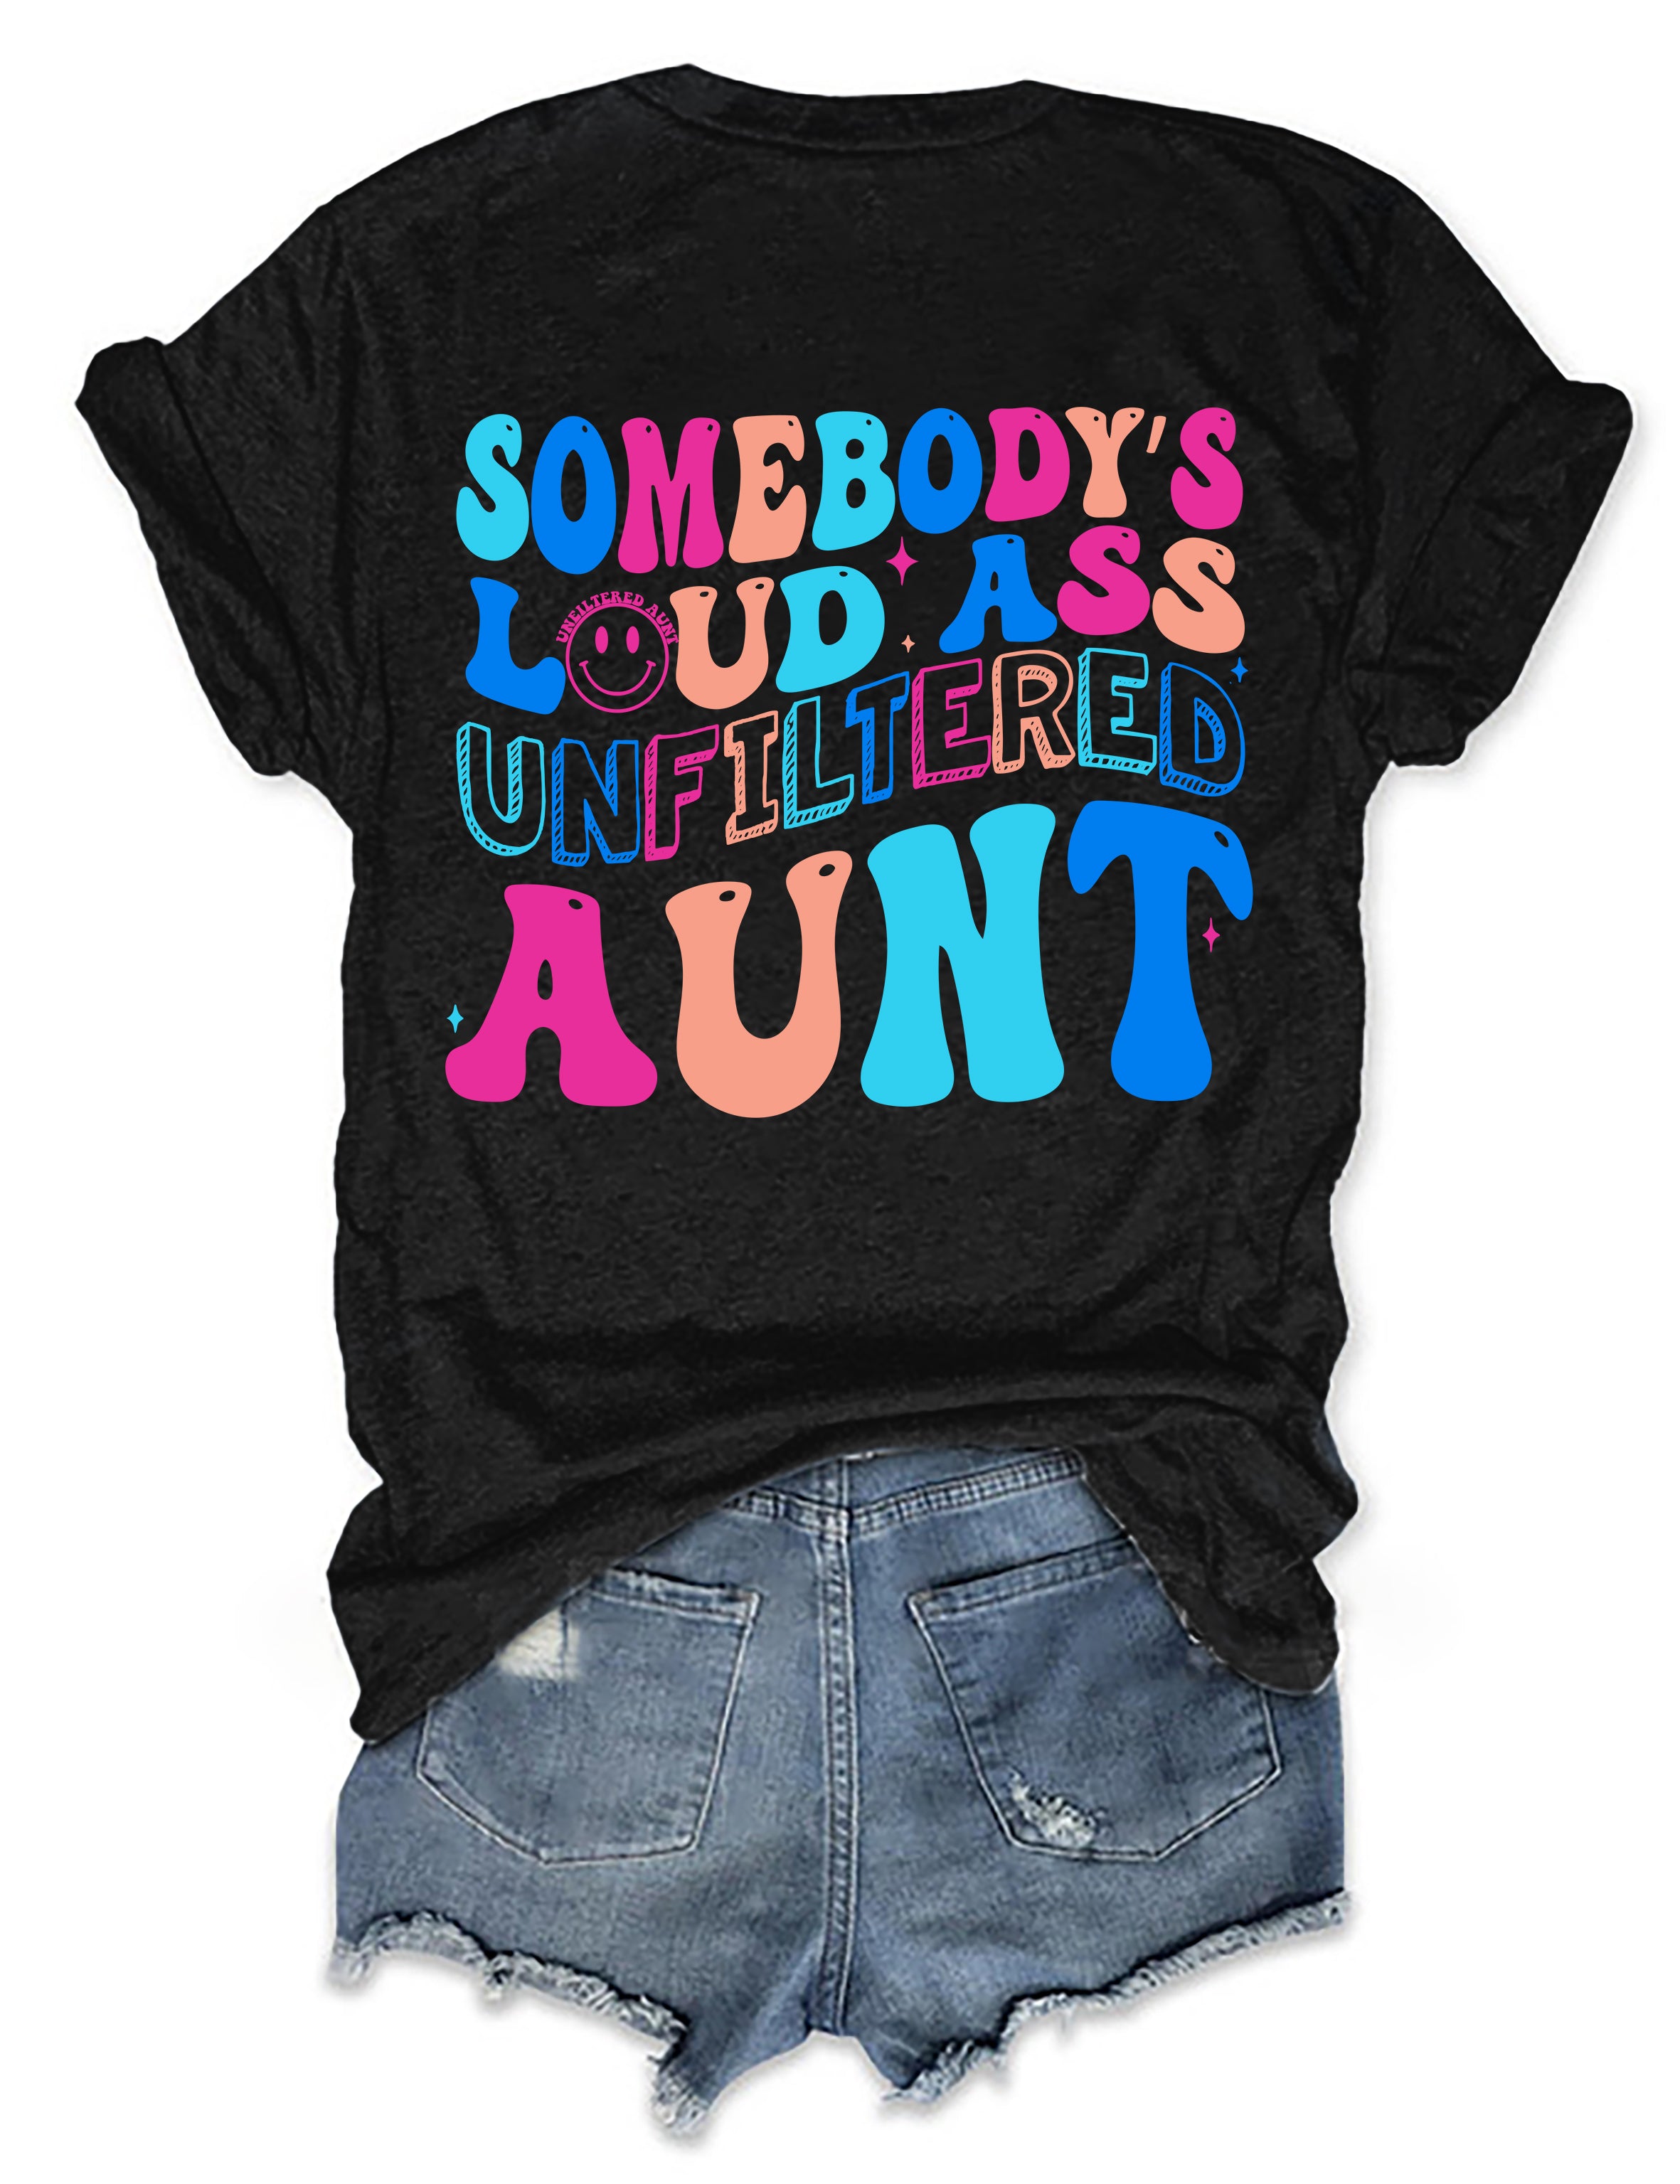 Somebody's Loud Ass Unfiltered Aunt T-shirt